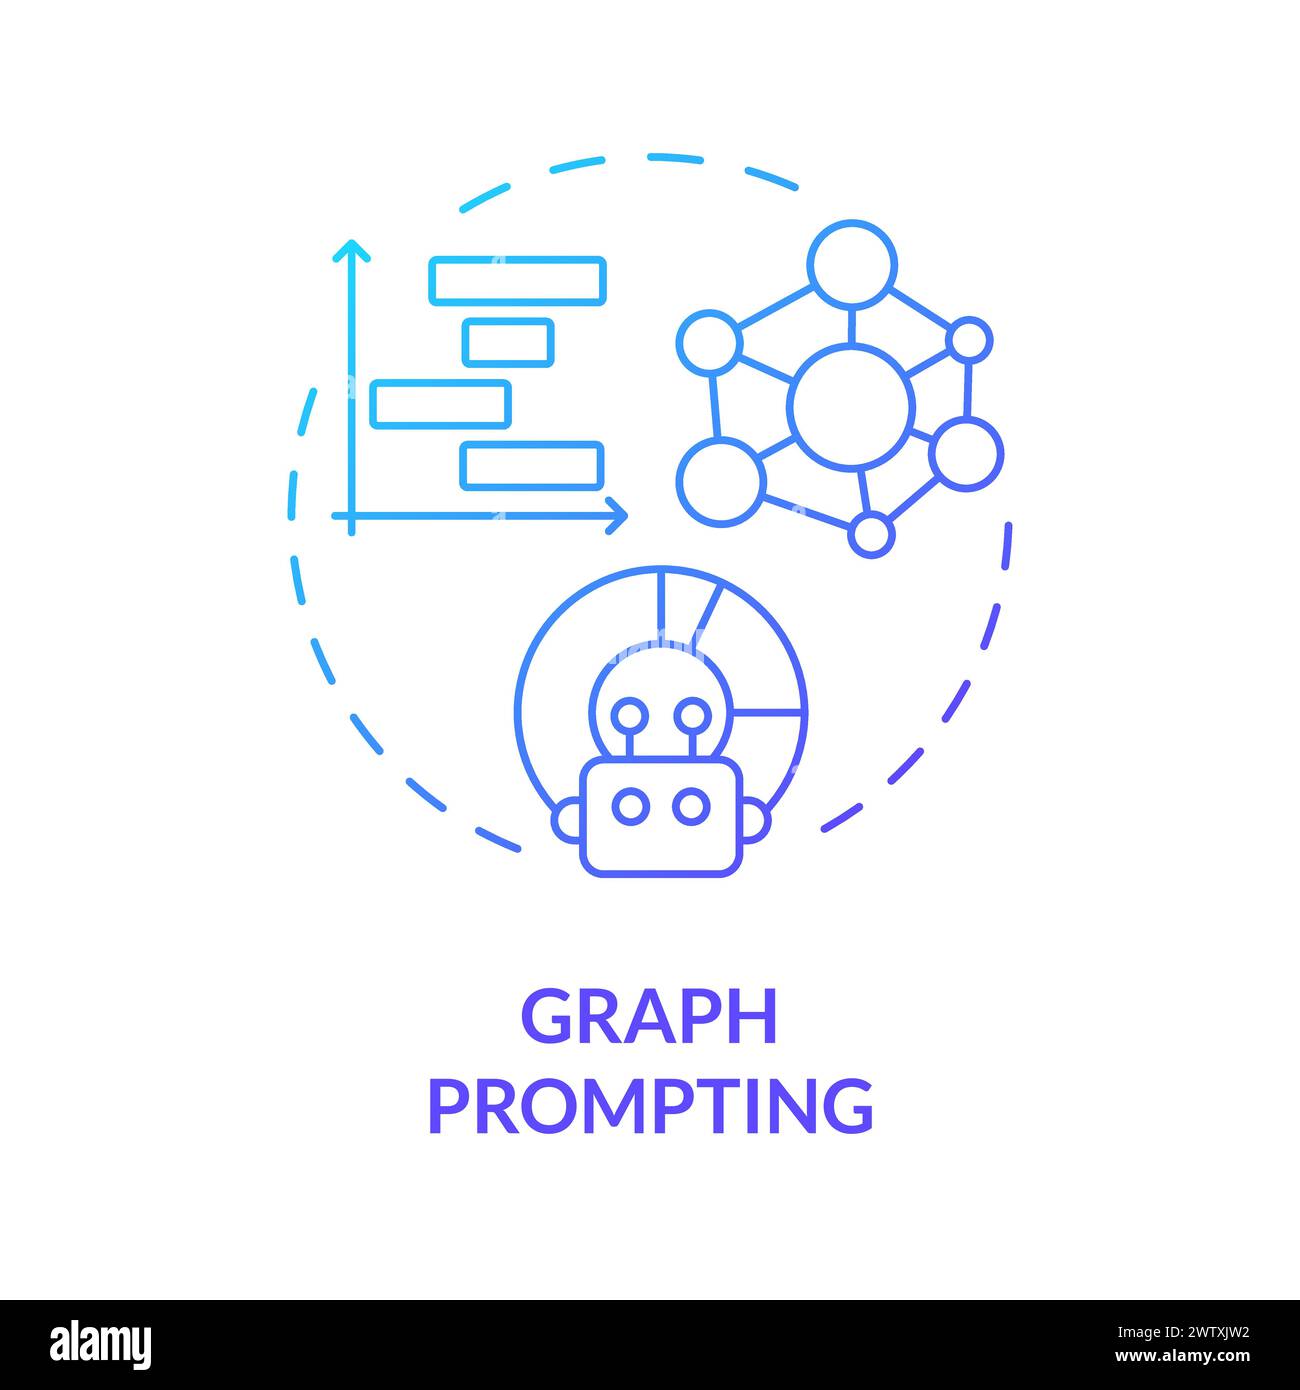 Graph prompting blue gradient concept icon Stock Vector